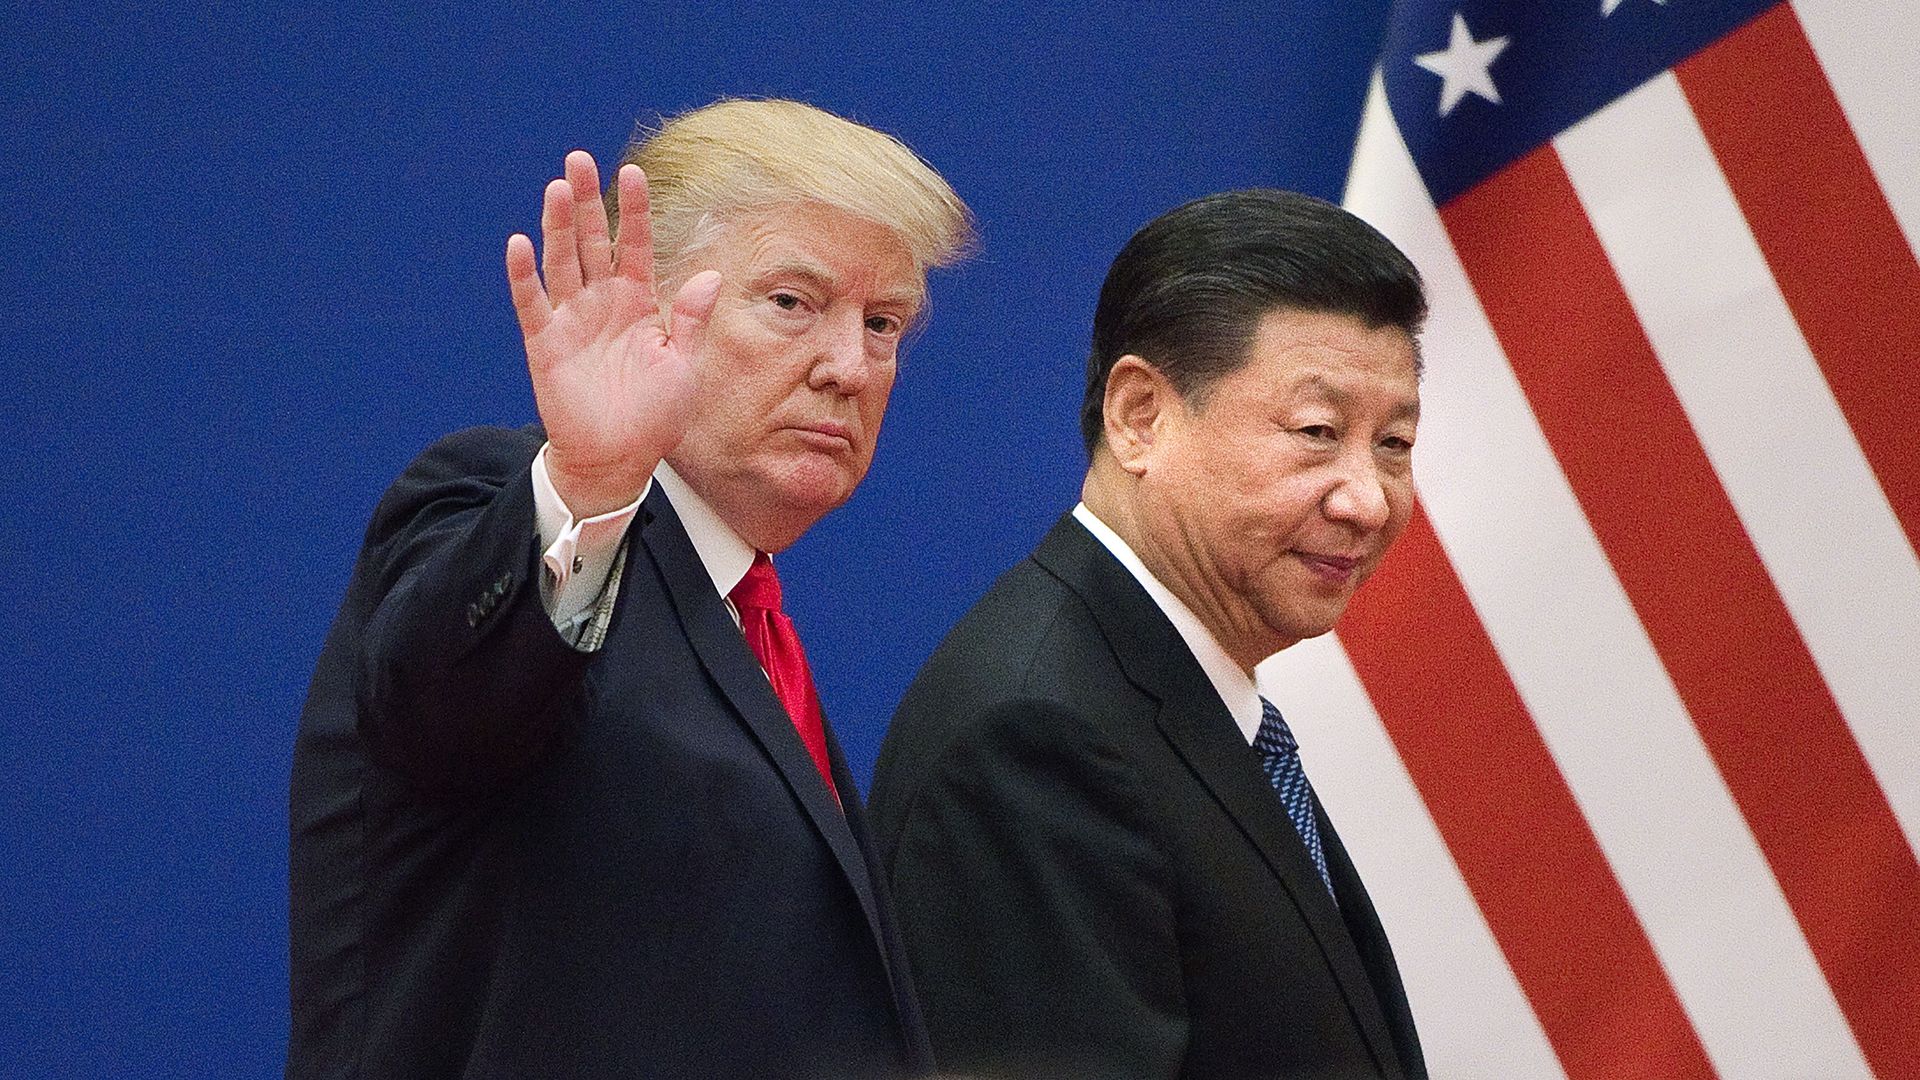 In this image, Trump and China's leader walk in the same direction towards an American flag while both wearing suits.